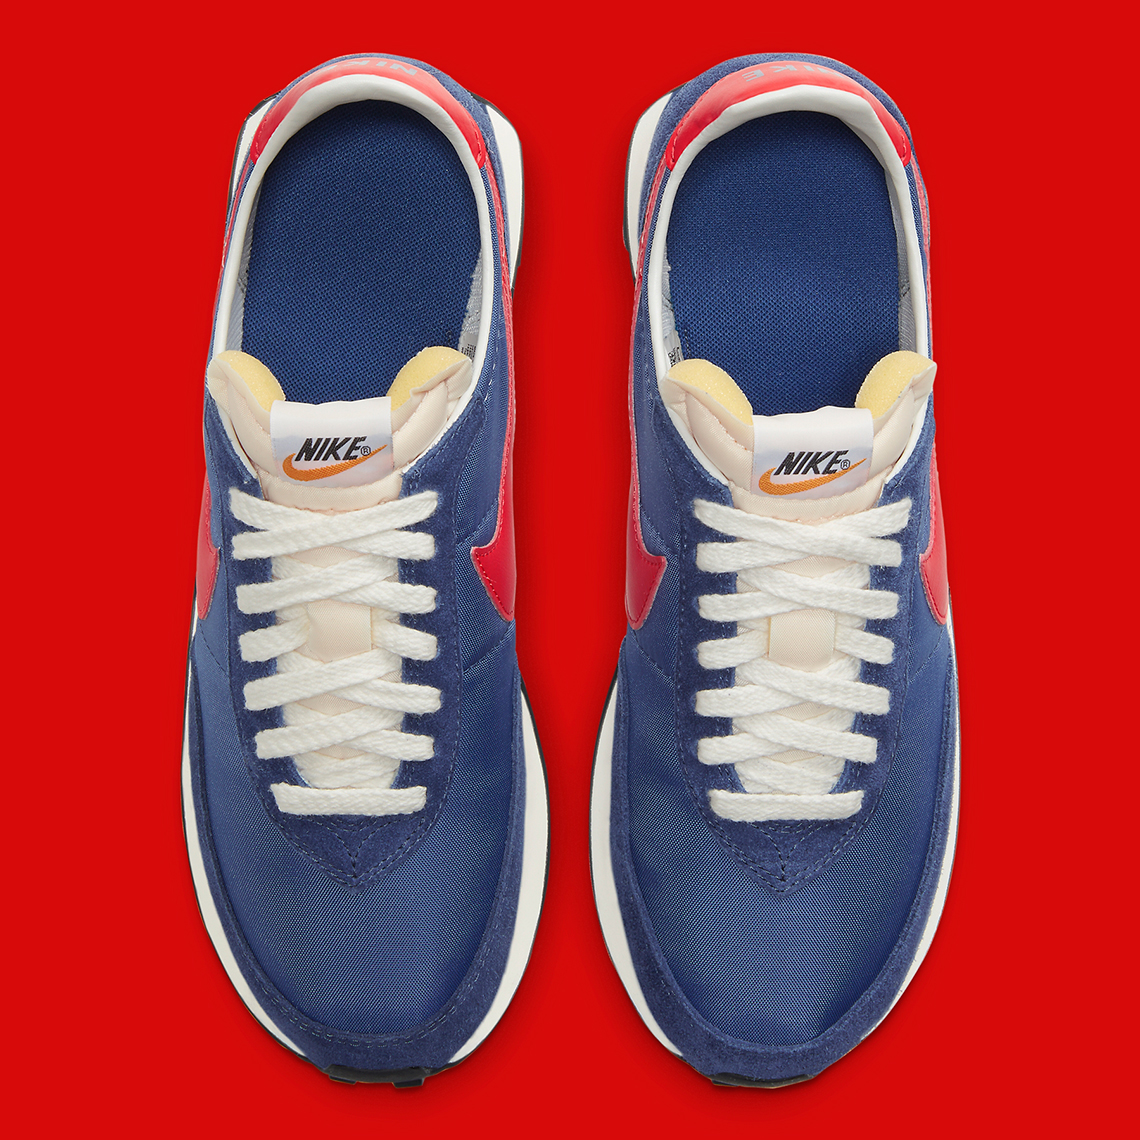 Nike ice Trainer Ii Navy Red Db3004 400 18